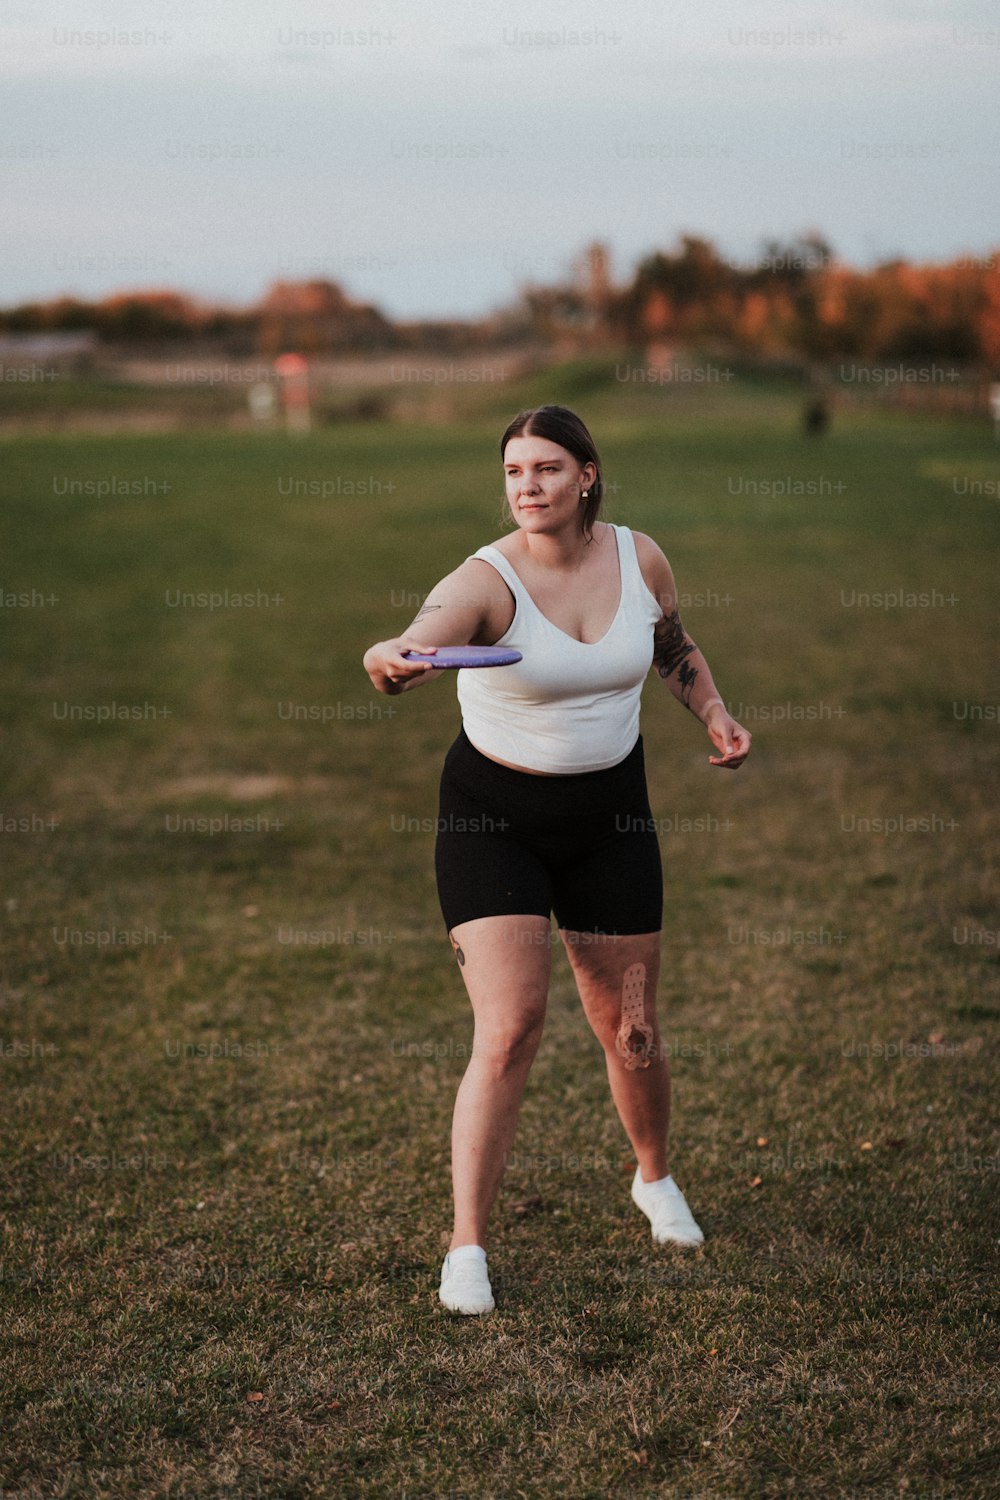 a woman standing in a field holding a frisbee